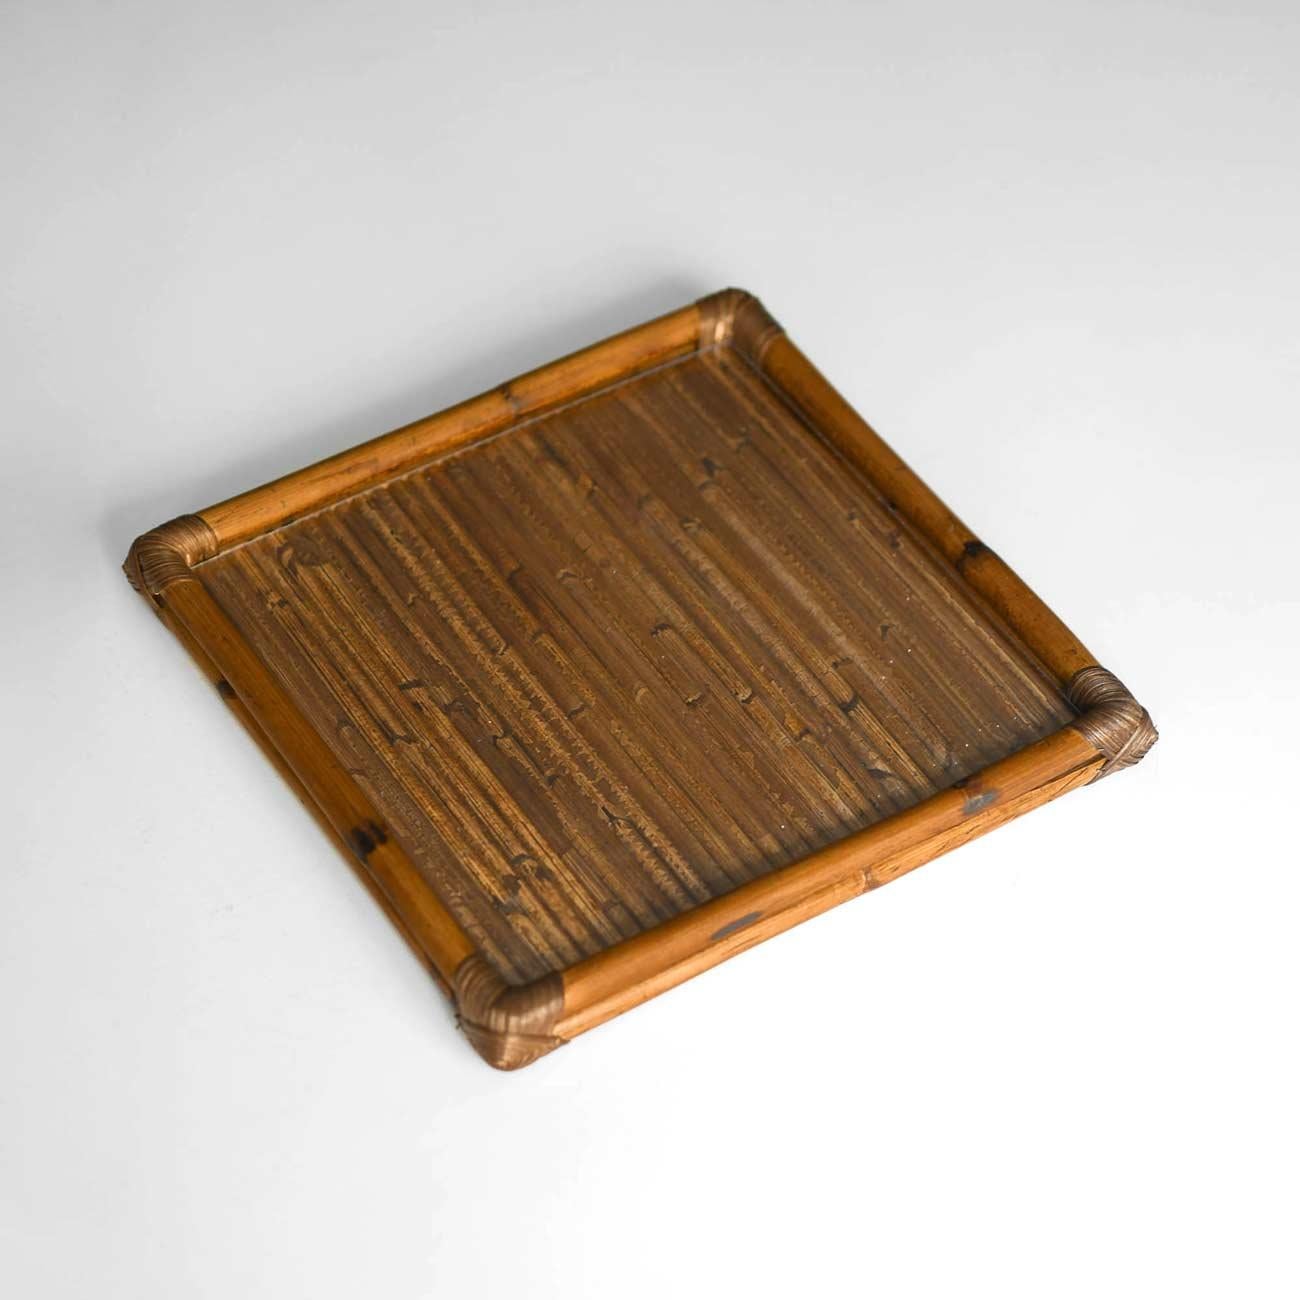 “Molto” bamboo tray. Italian artisanal production.
Dimensions: 40w x 4h x 40d cm
Materials: bamboo
Production: Italian manufacturing
Dimension can be customized upon request.